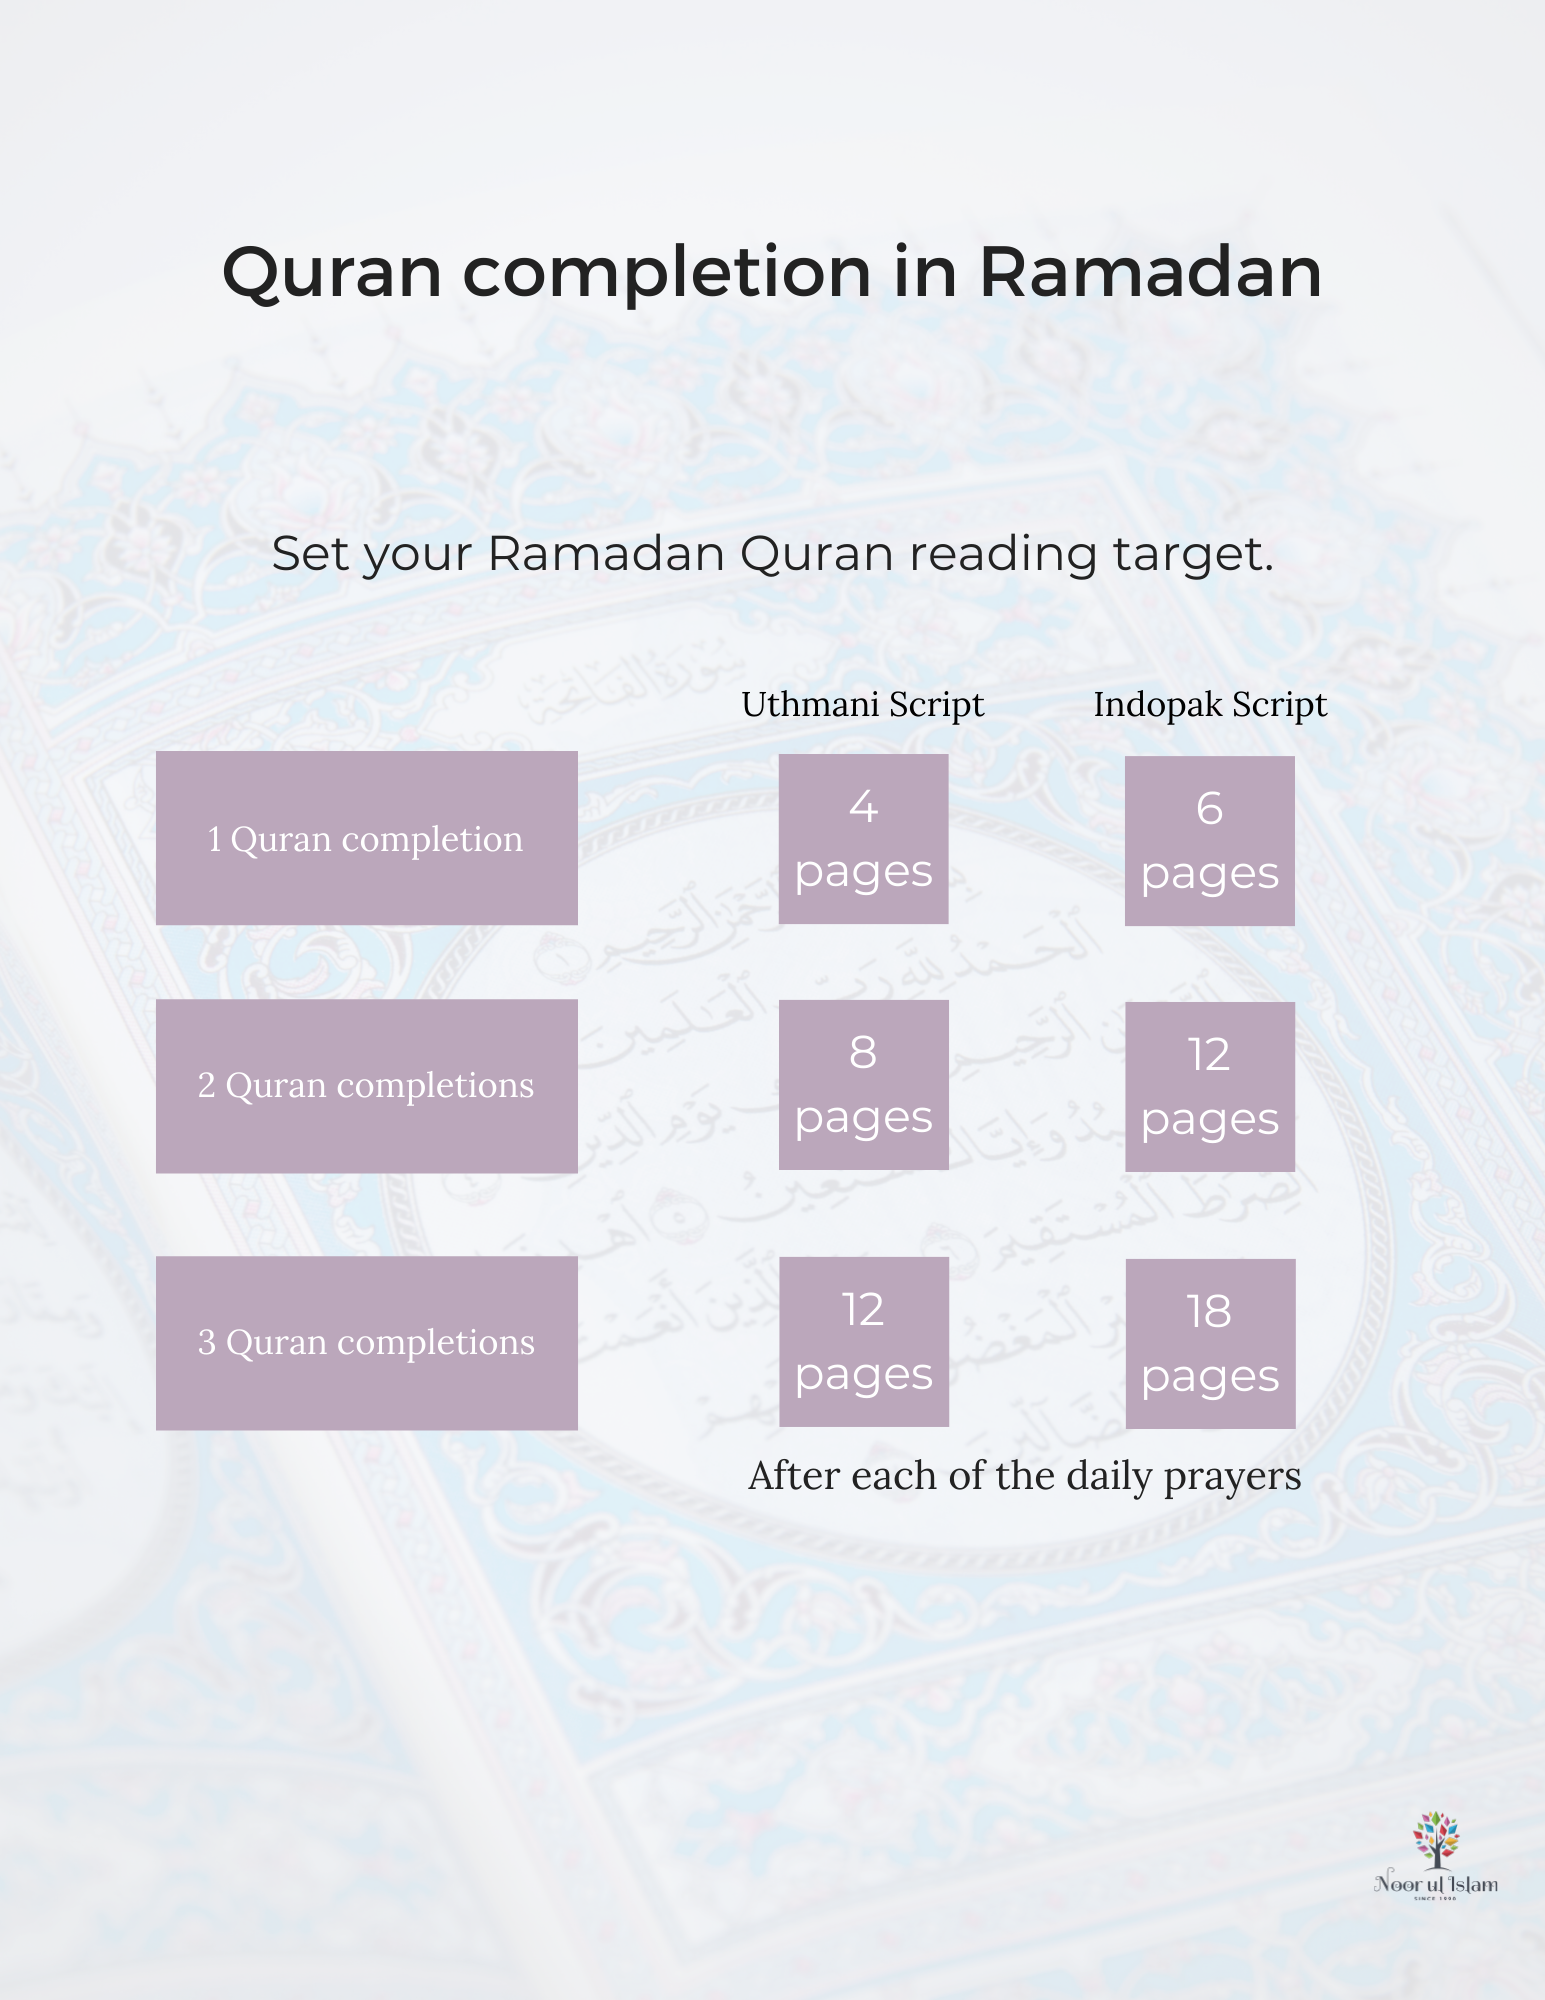 Quran completion guide